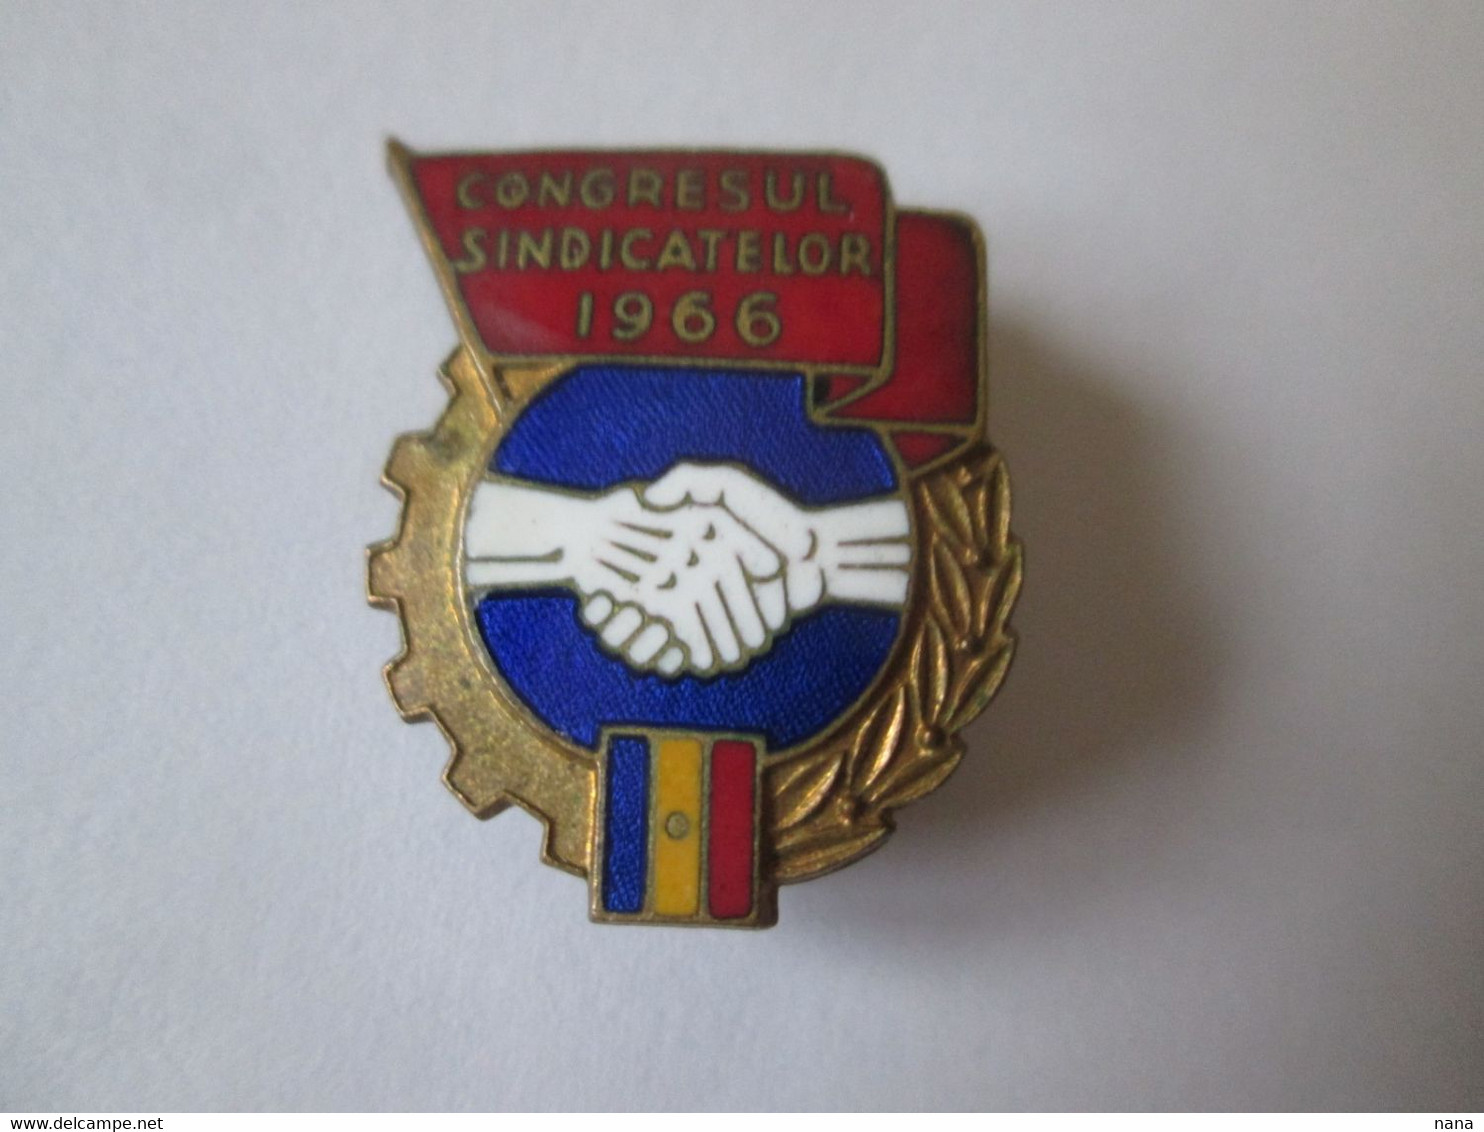 Roumanie Insigne Congres Syndical 1966,d=25x18 Mm/Romania Trade Union Congress Badge 1966,s=25x18 Mm - Associations